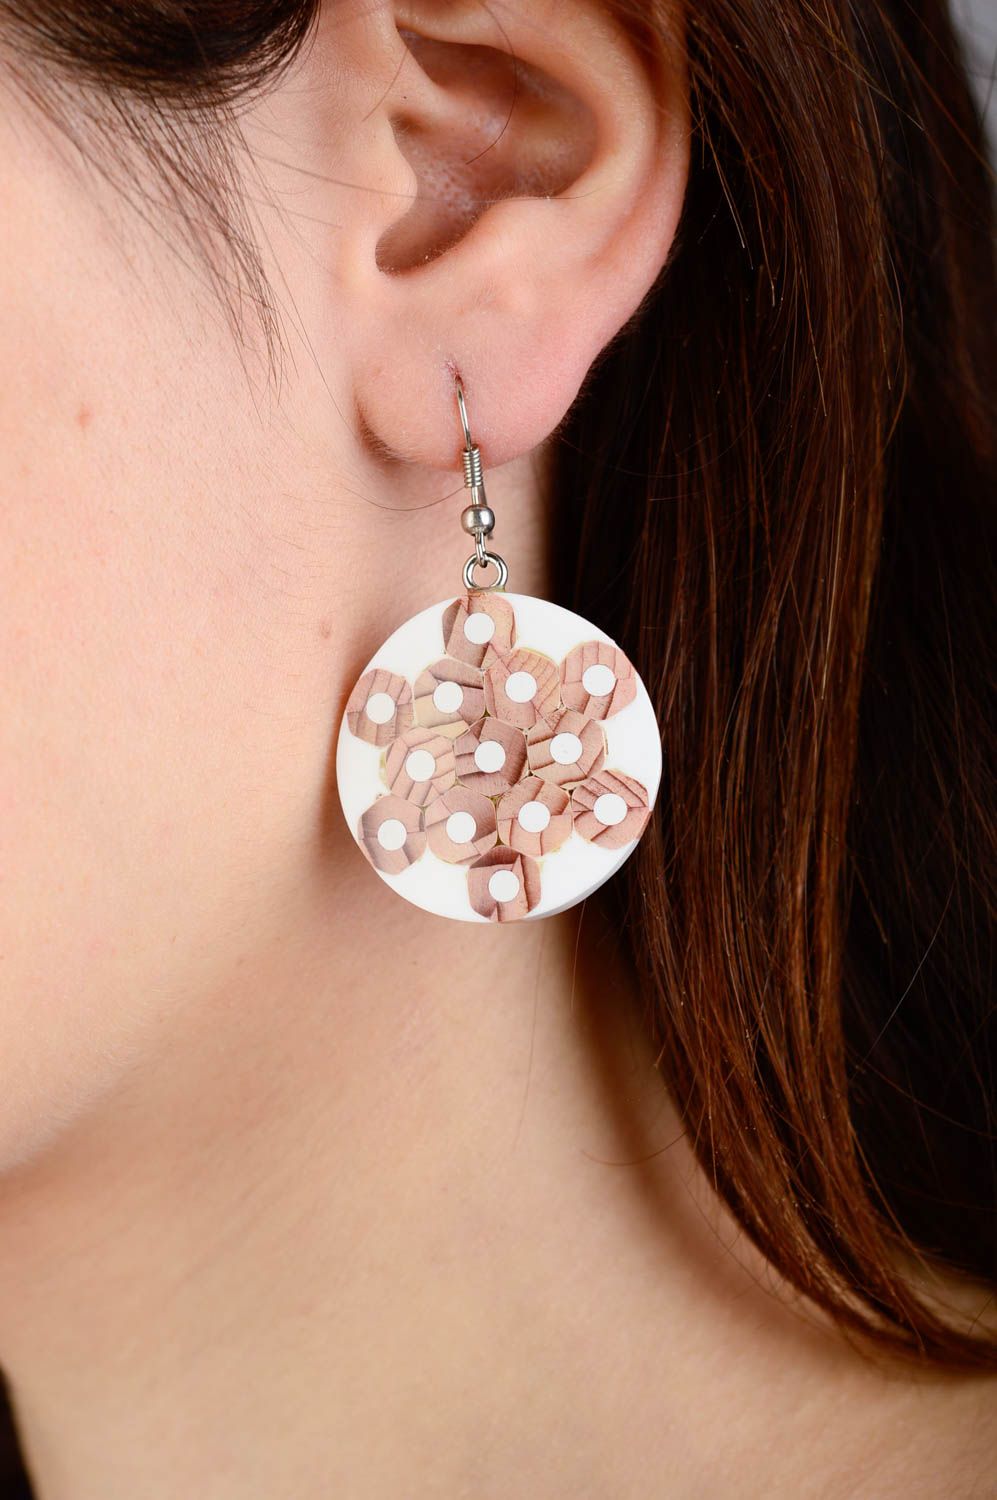 Handcrafted jewelry round earrings wood jewelry fashion earrings for girls photo 2